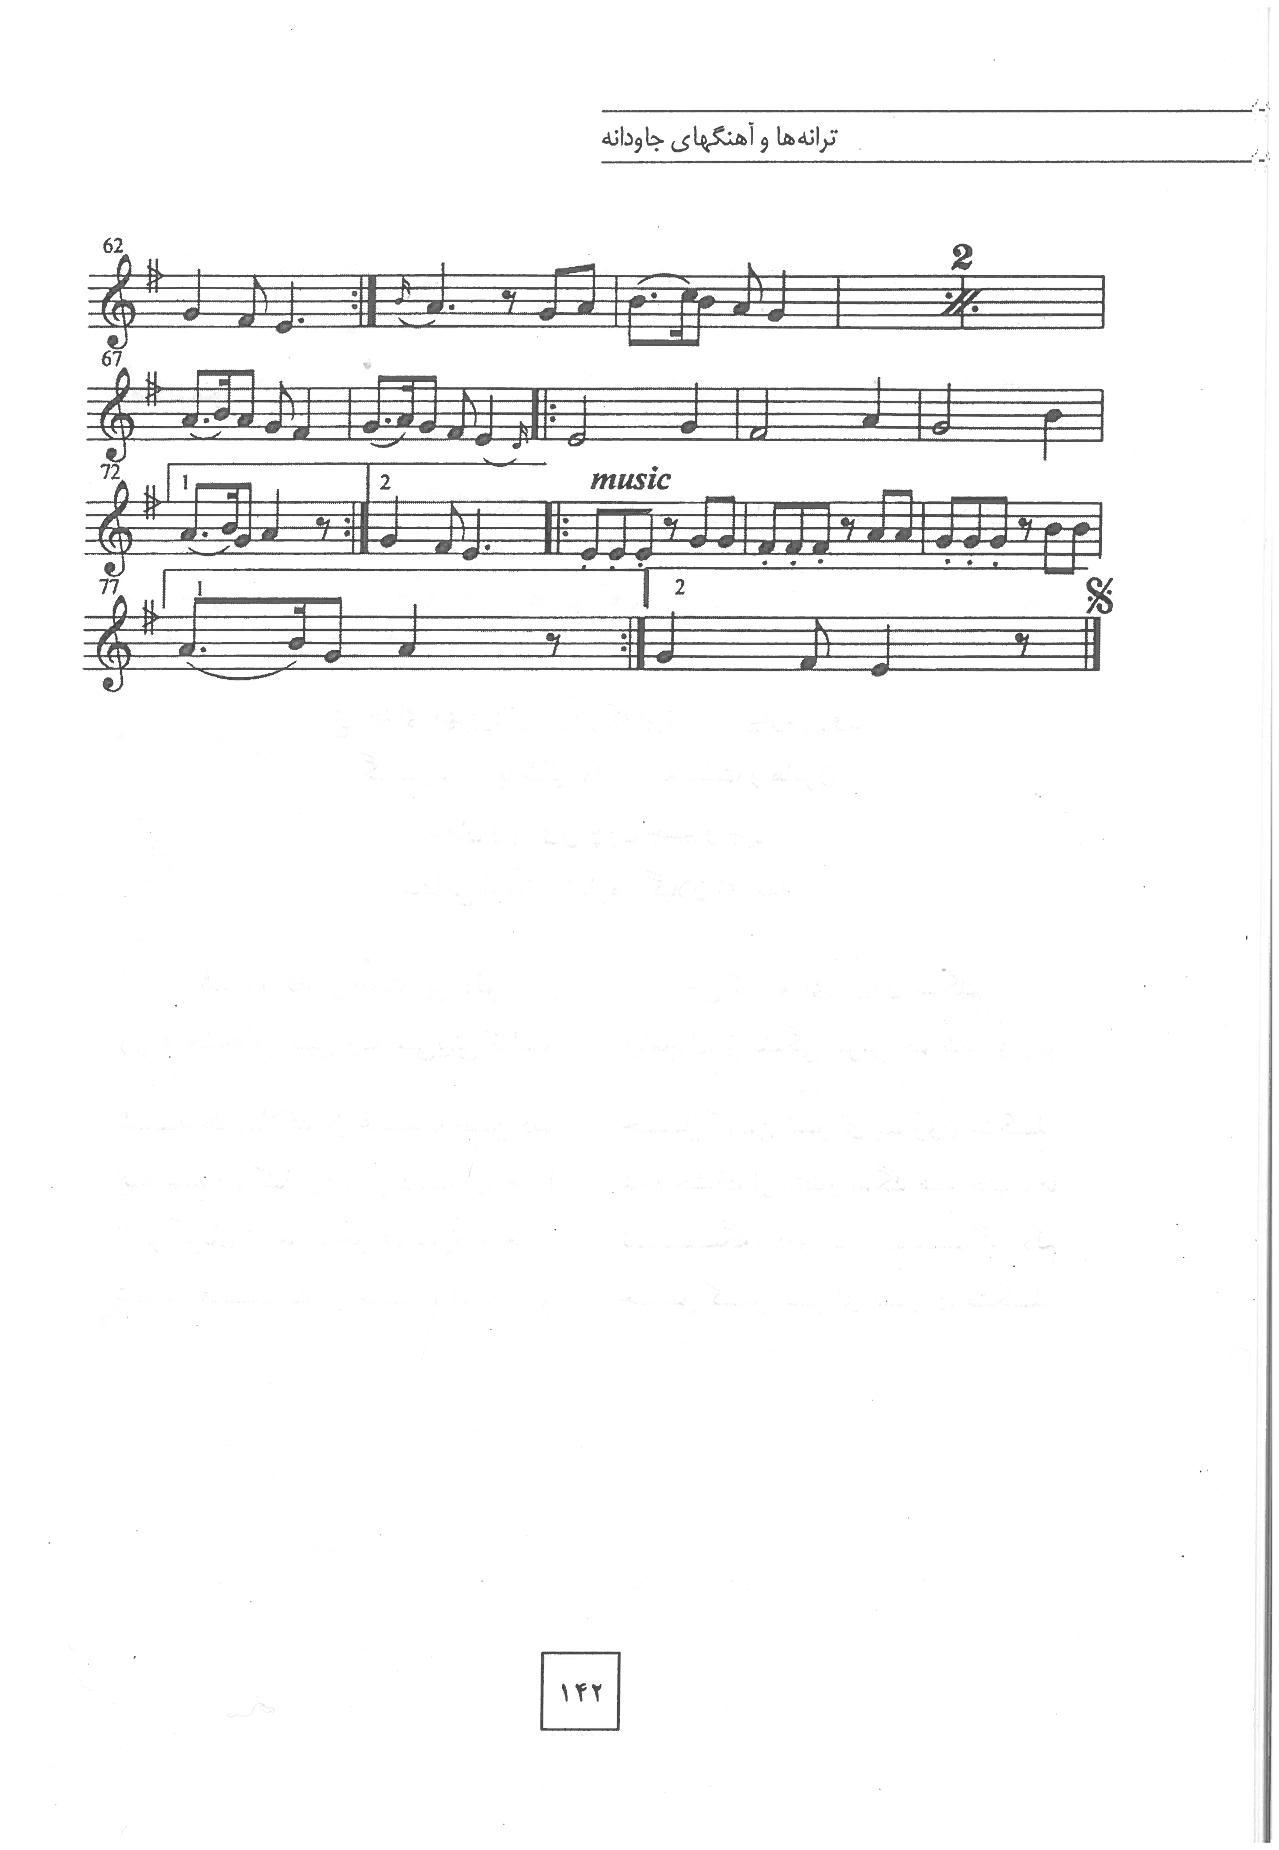 A sheet music page with two different notes.